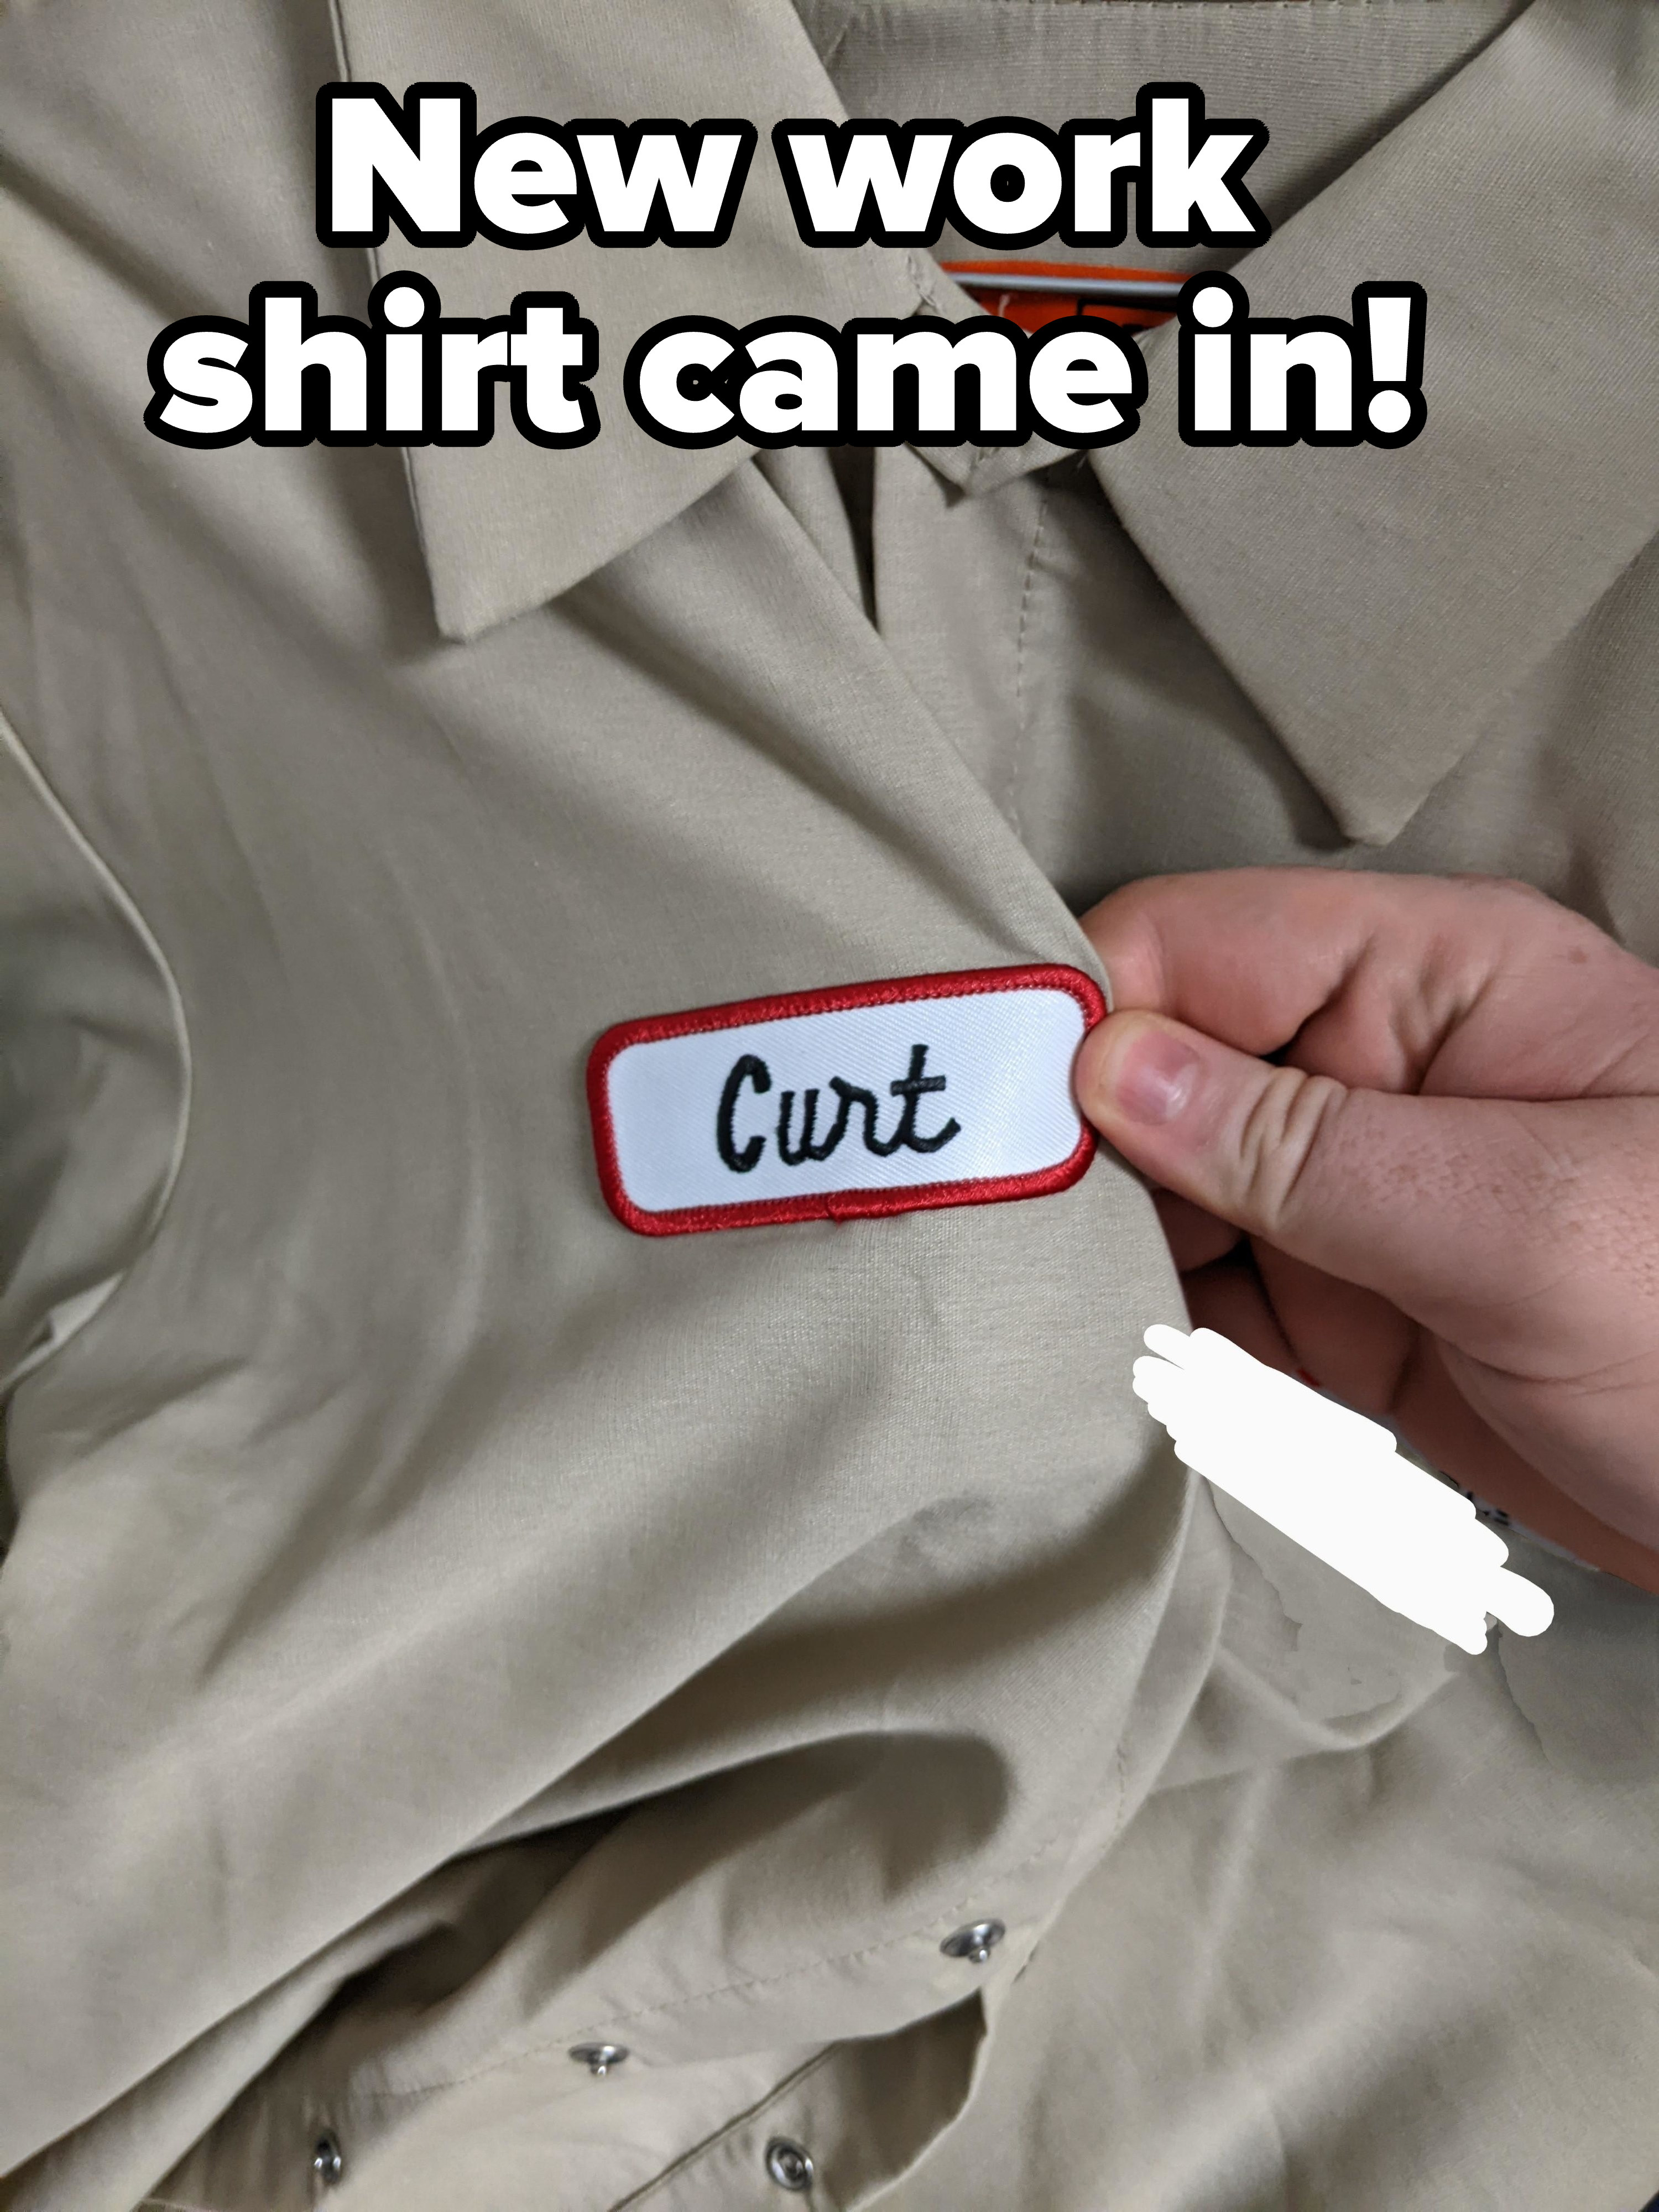 &quot;Curt&quot; name tag that looks like the c-word